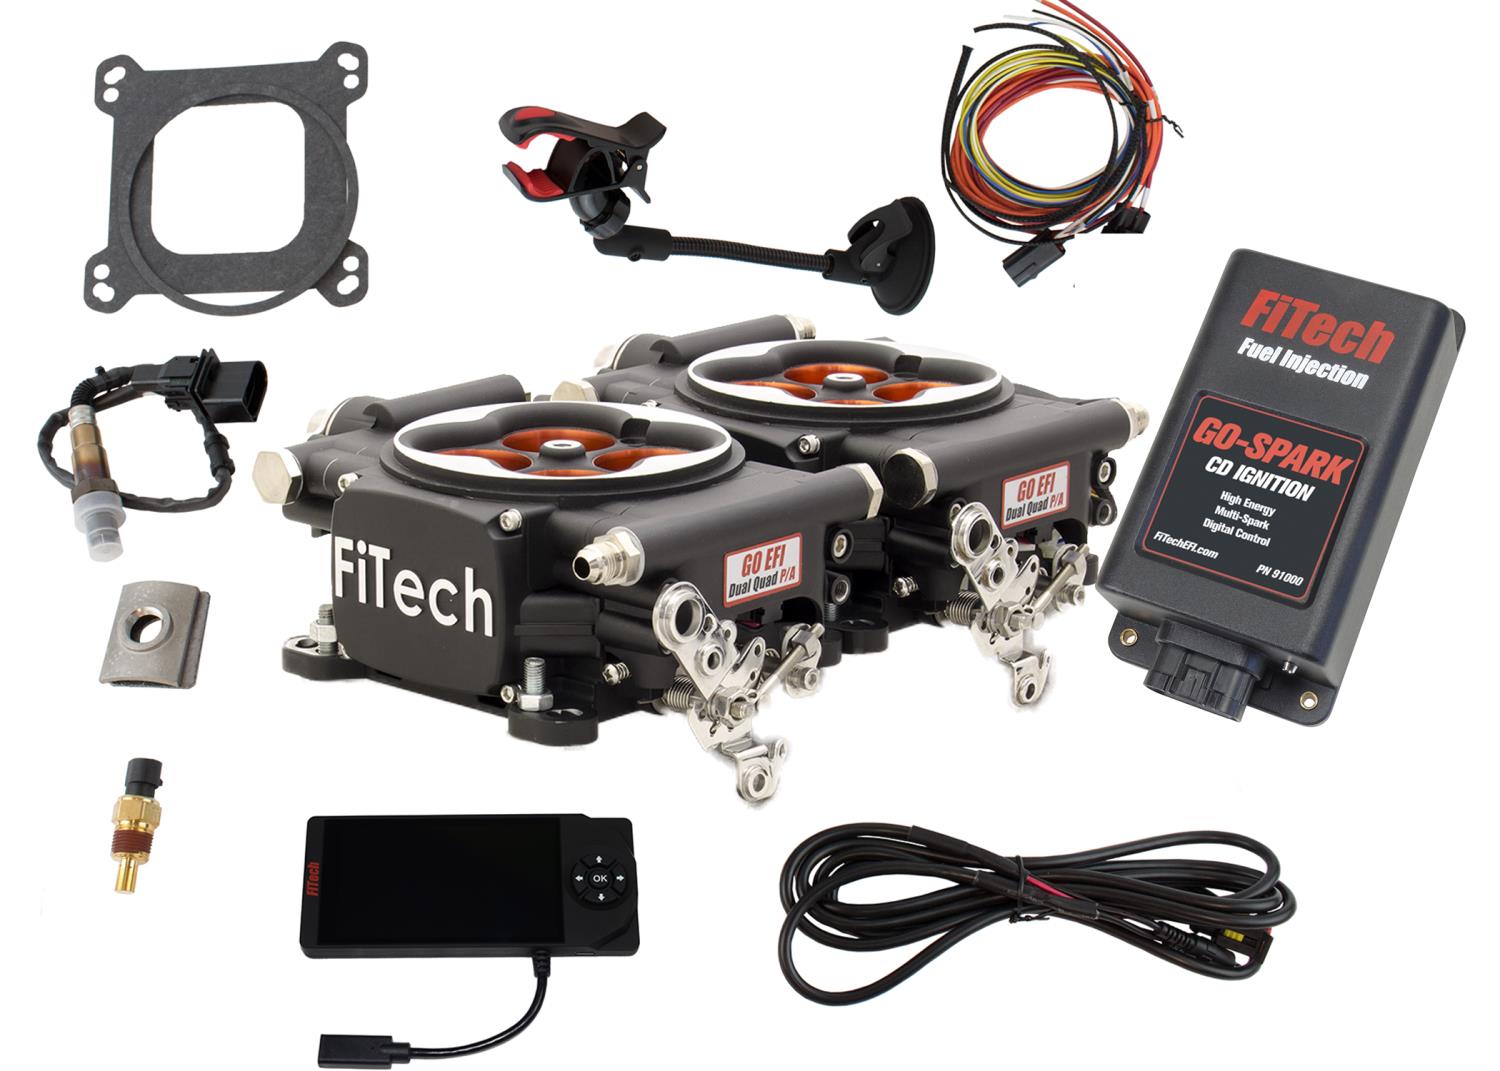 Go EFI 2x4 1200 HP Power Adder Throttle Body Fuel Injection Master Kit [with CDI Box] Matte Black